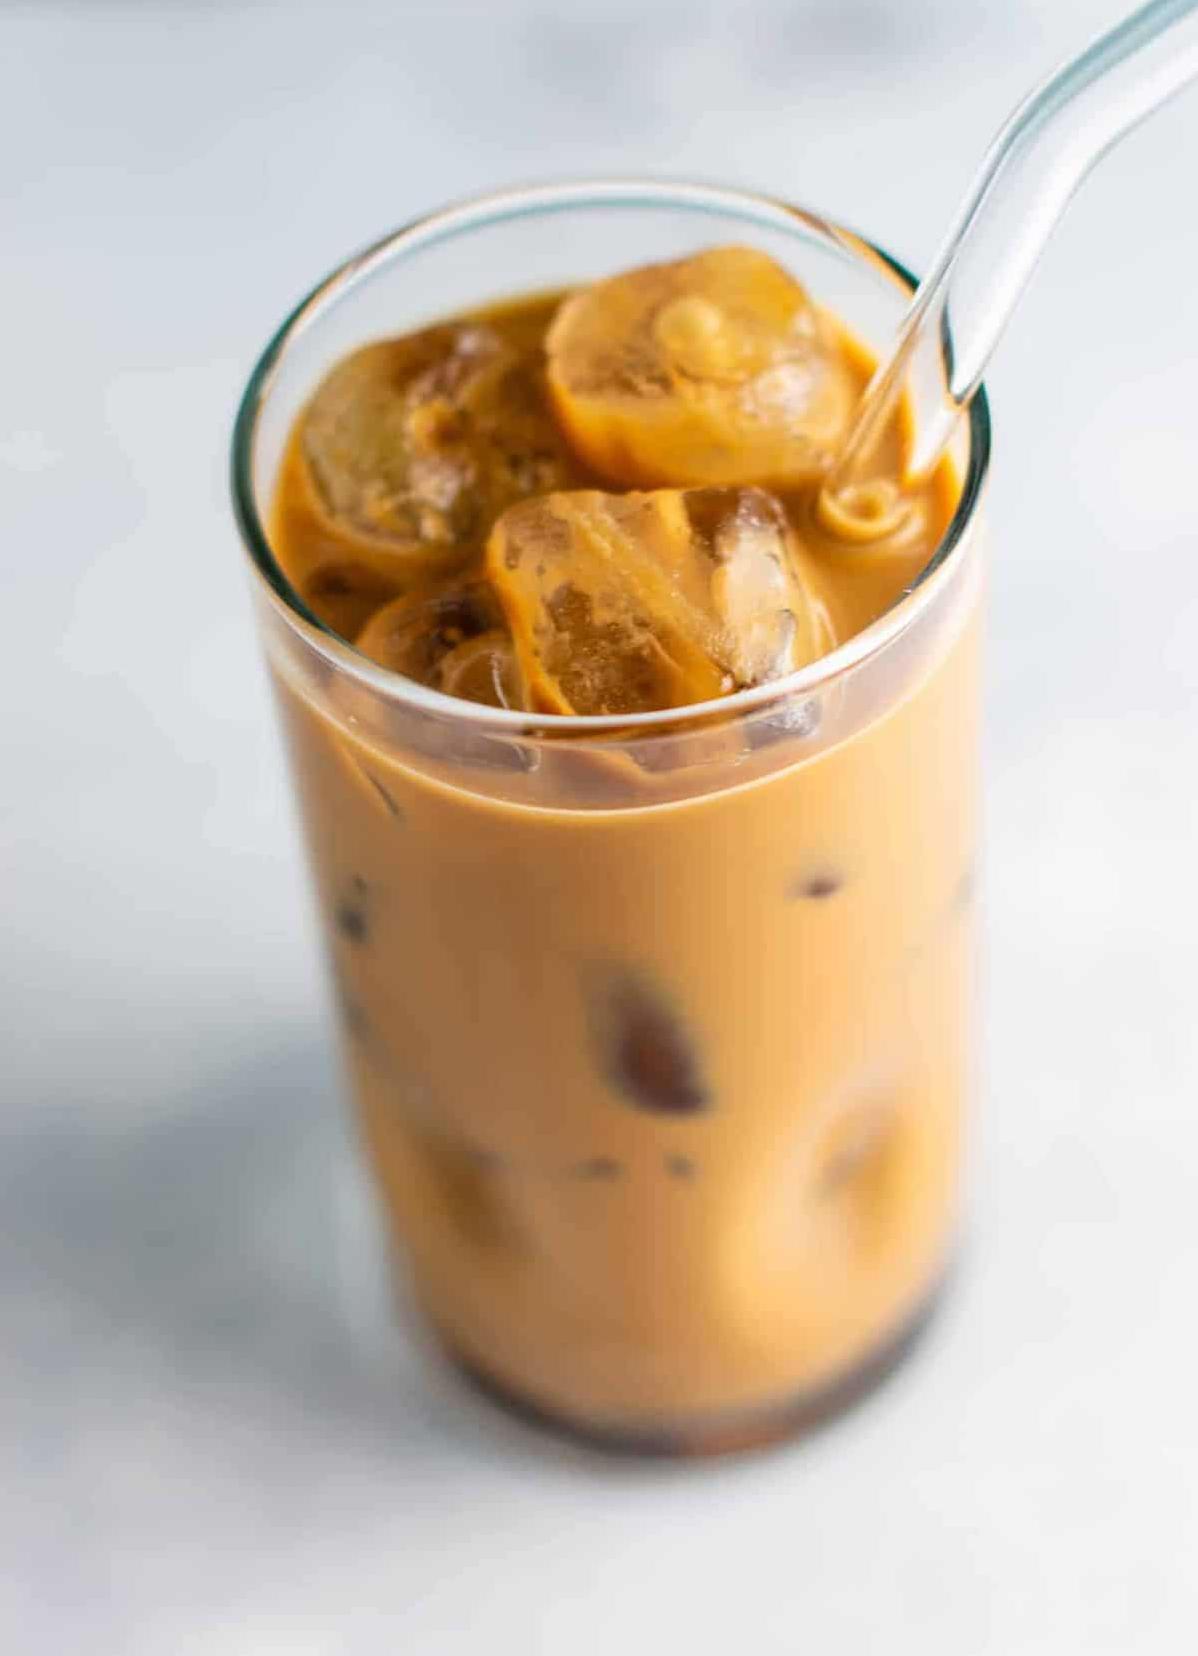  Stay cool and caffeinated with this easy instant iced coffee recipe.